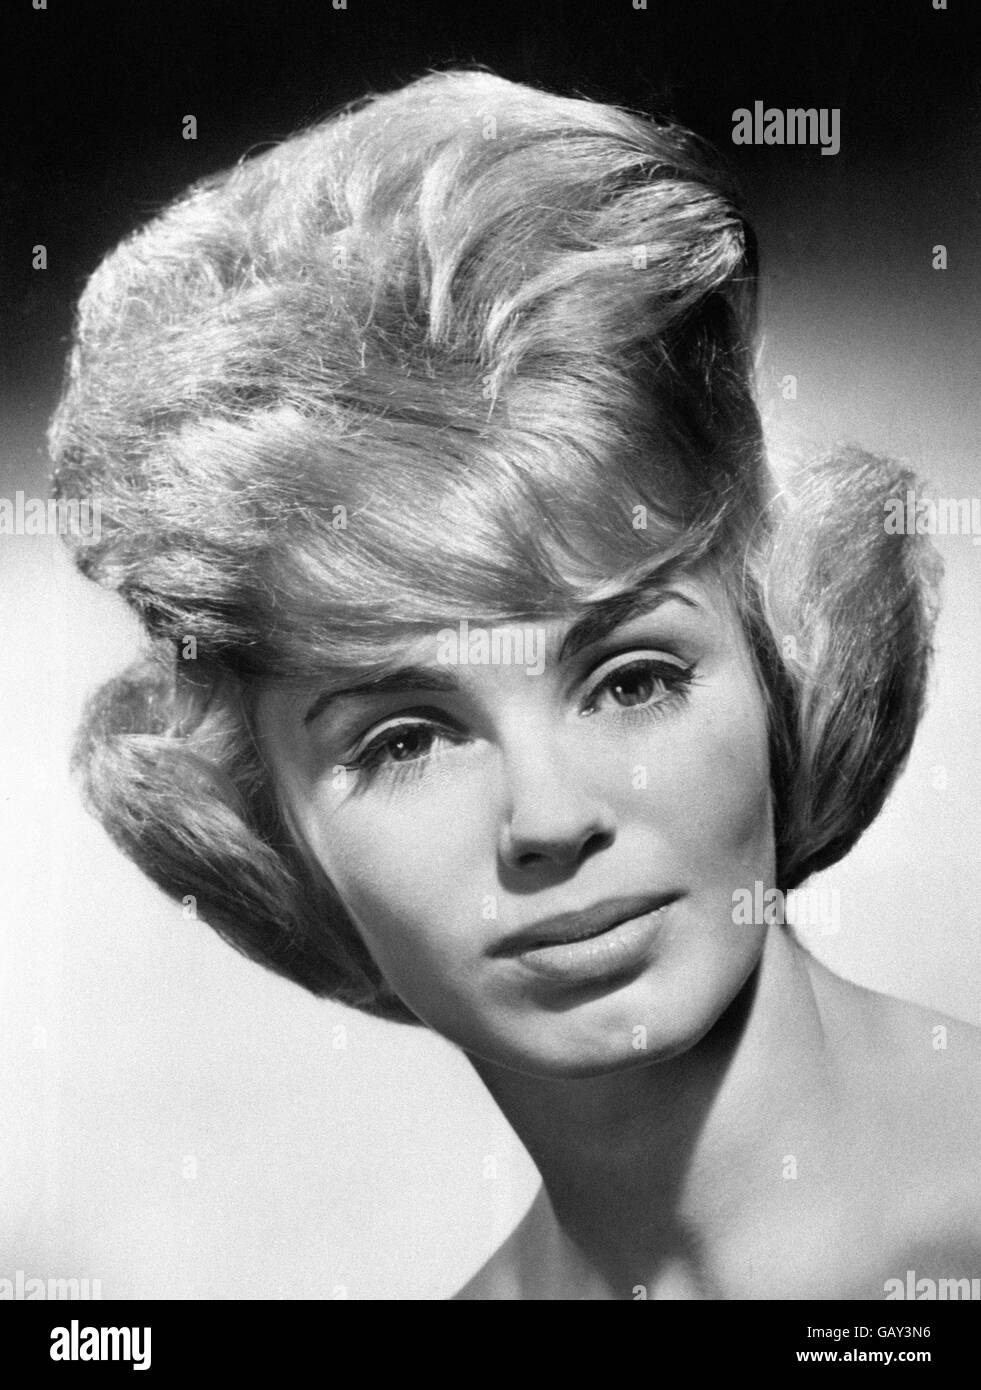 1960s Hairstyles Stock Photos 1960s Hairstyles Stock Images Alamy